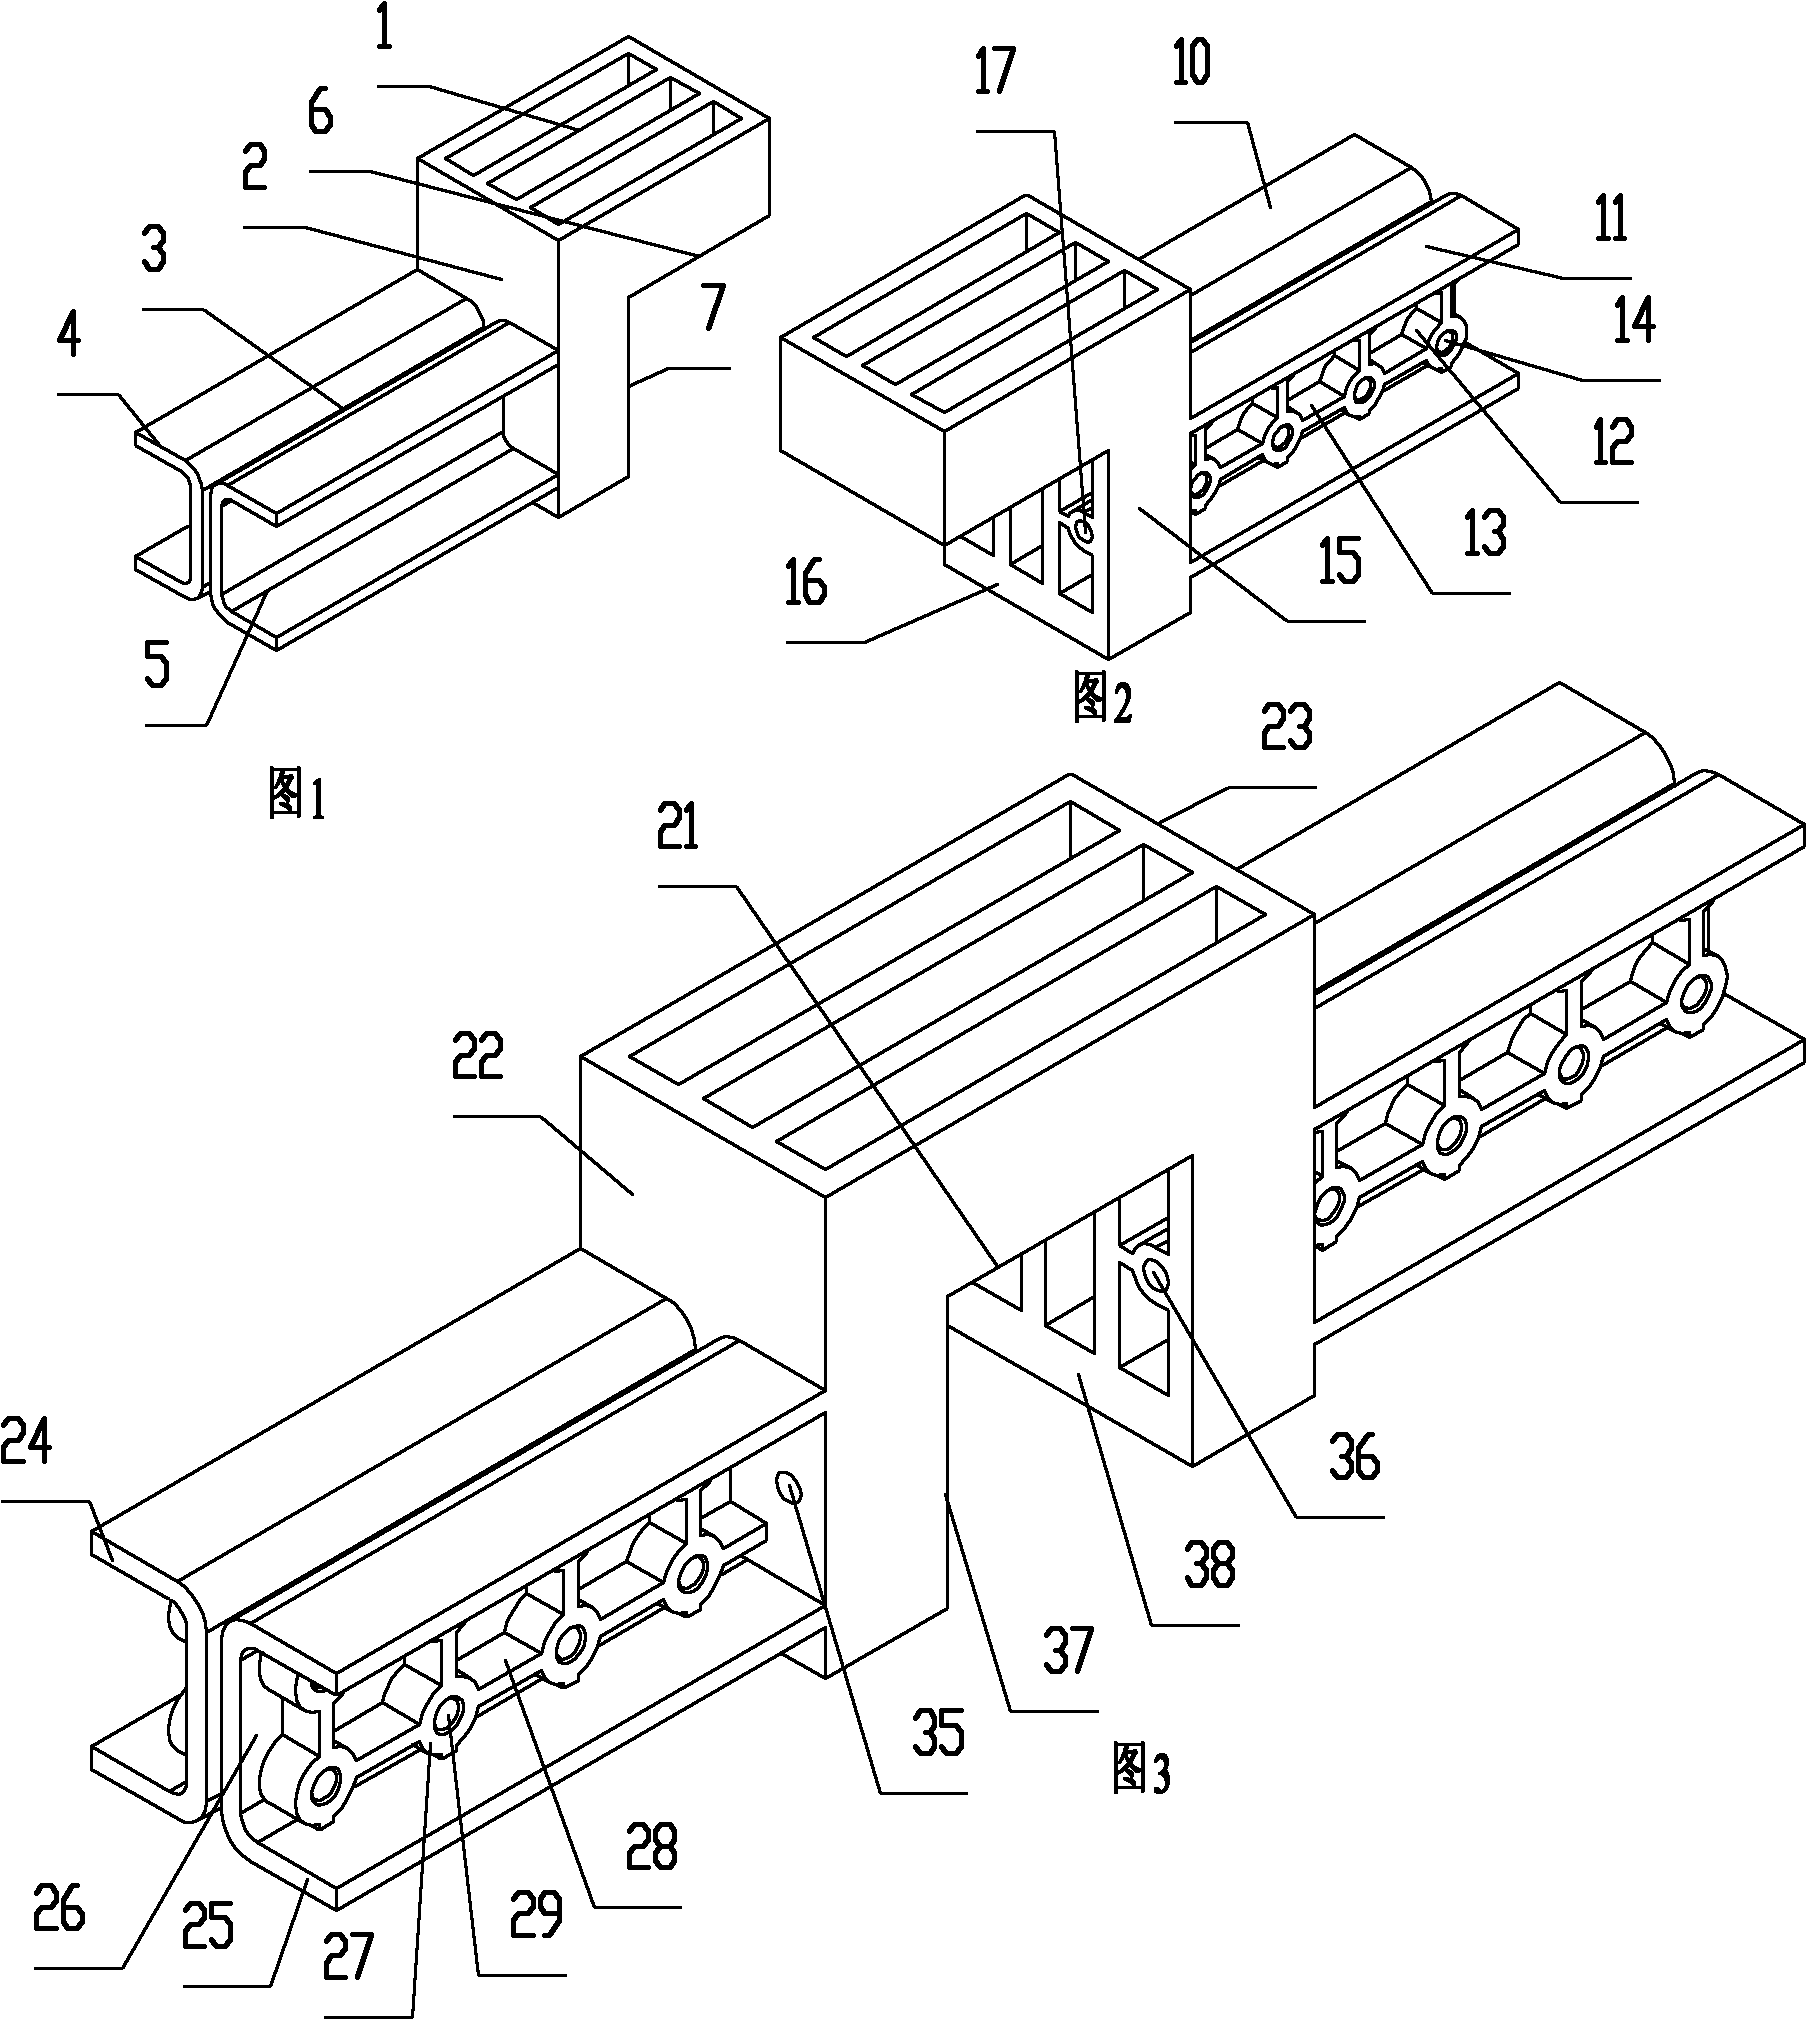 A beam hanger, building frame structure and installation method